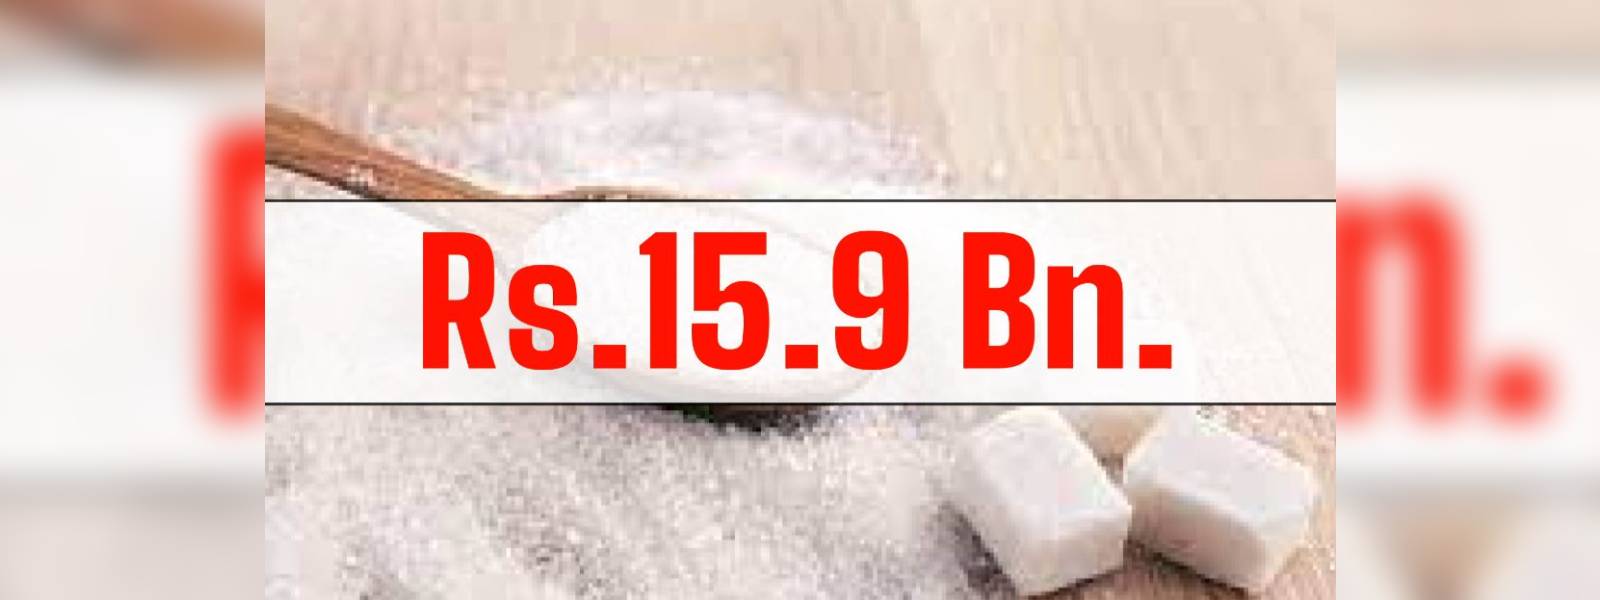 More details on sugar scam come to light